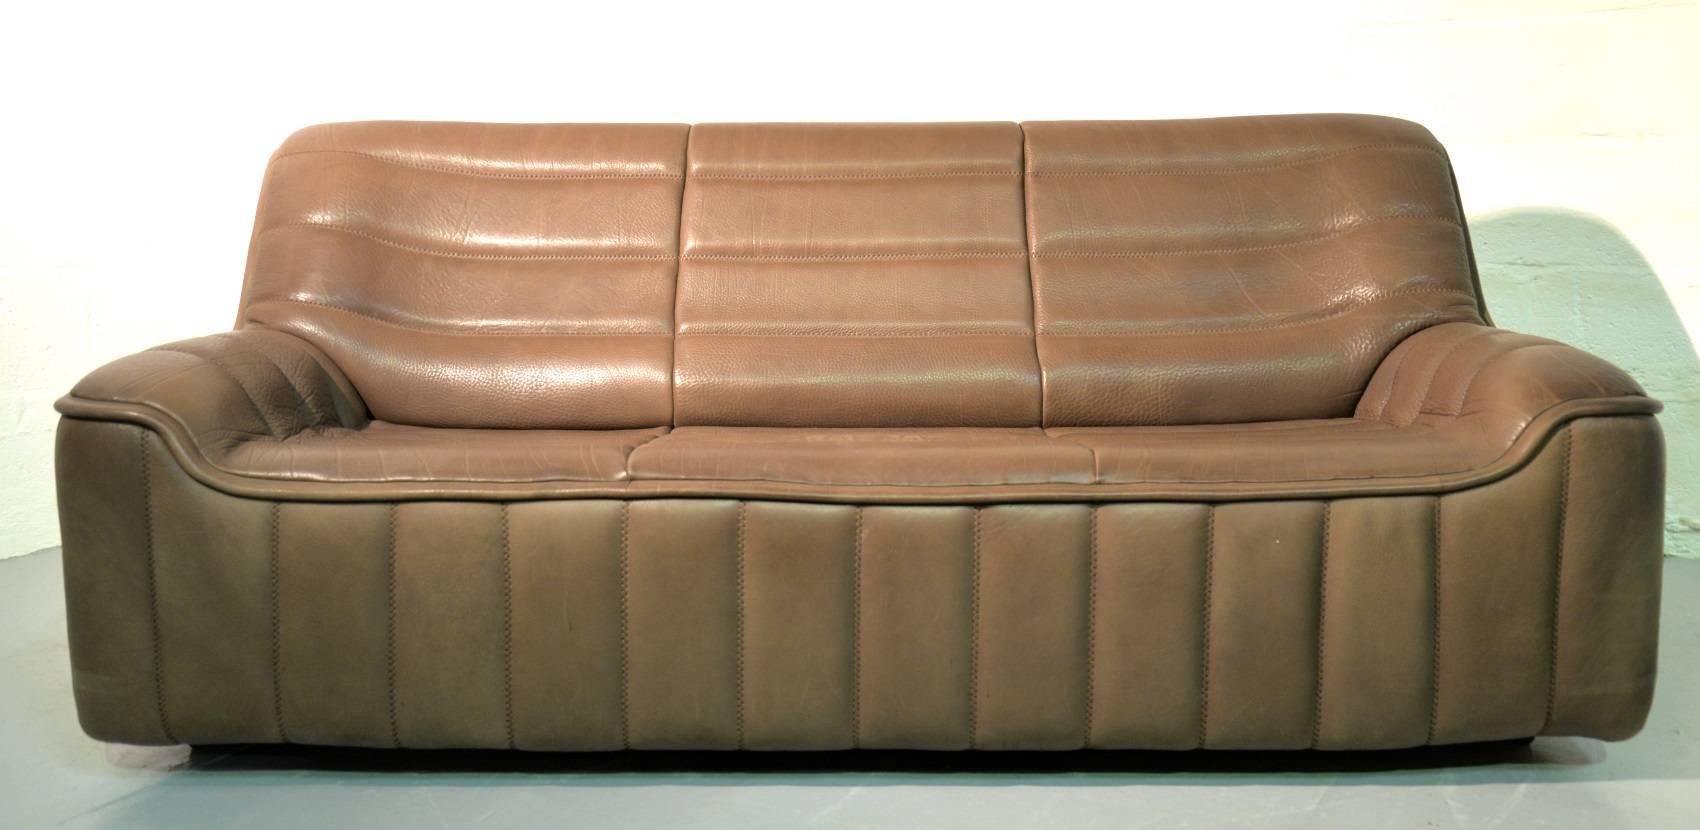 Vintage Swiss De Sede DS 84 leather sofa and armchairs suite, Switzerland 1970s 4